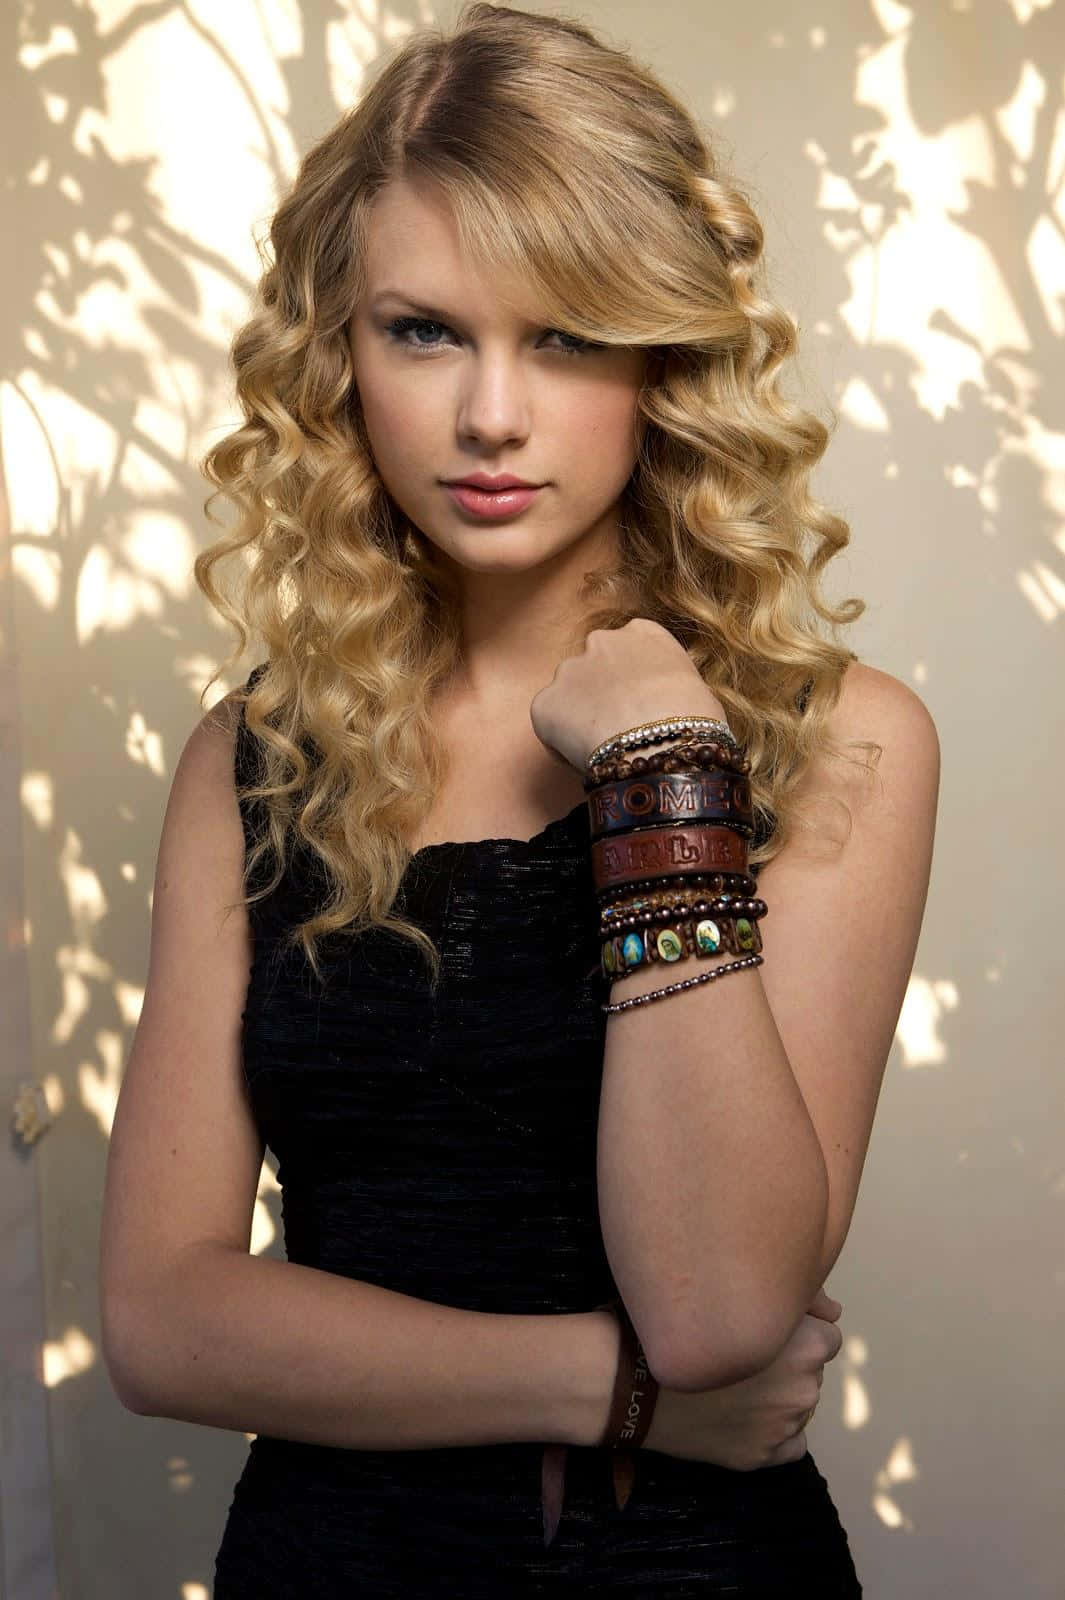 Curly Haired Blondewith Bracelets Wallpaper